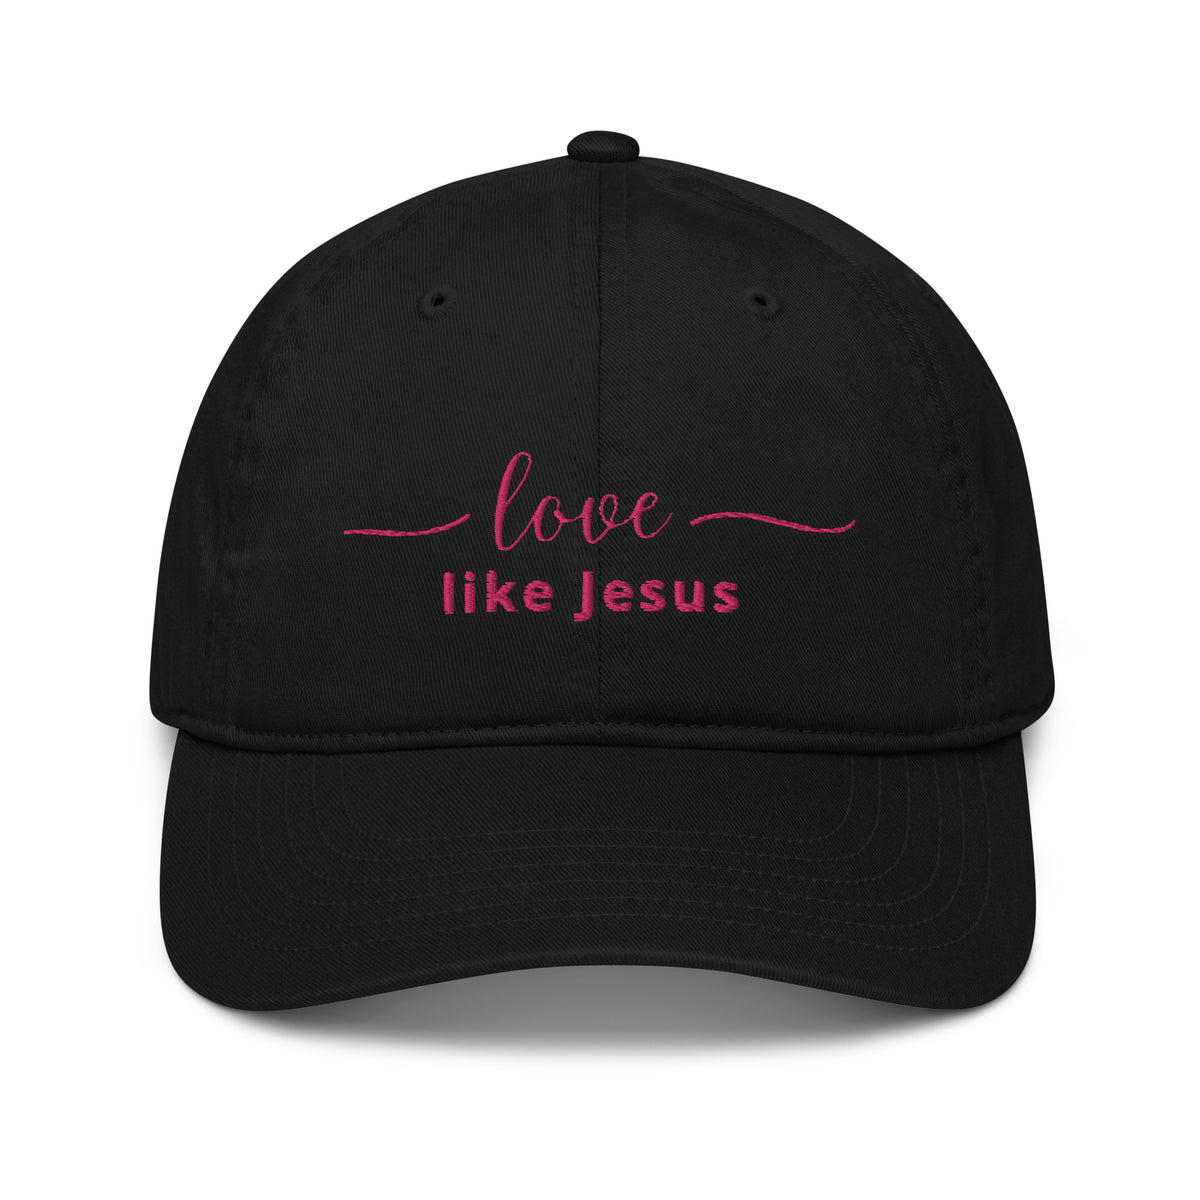 LOVE like Jesus cap - 5 colors available